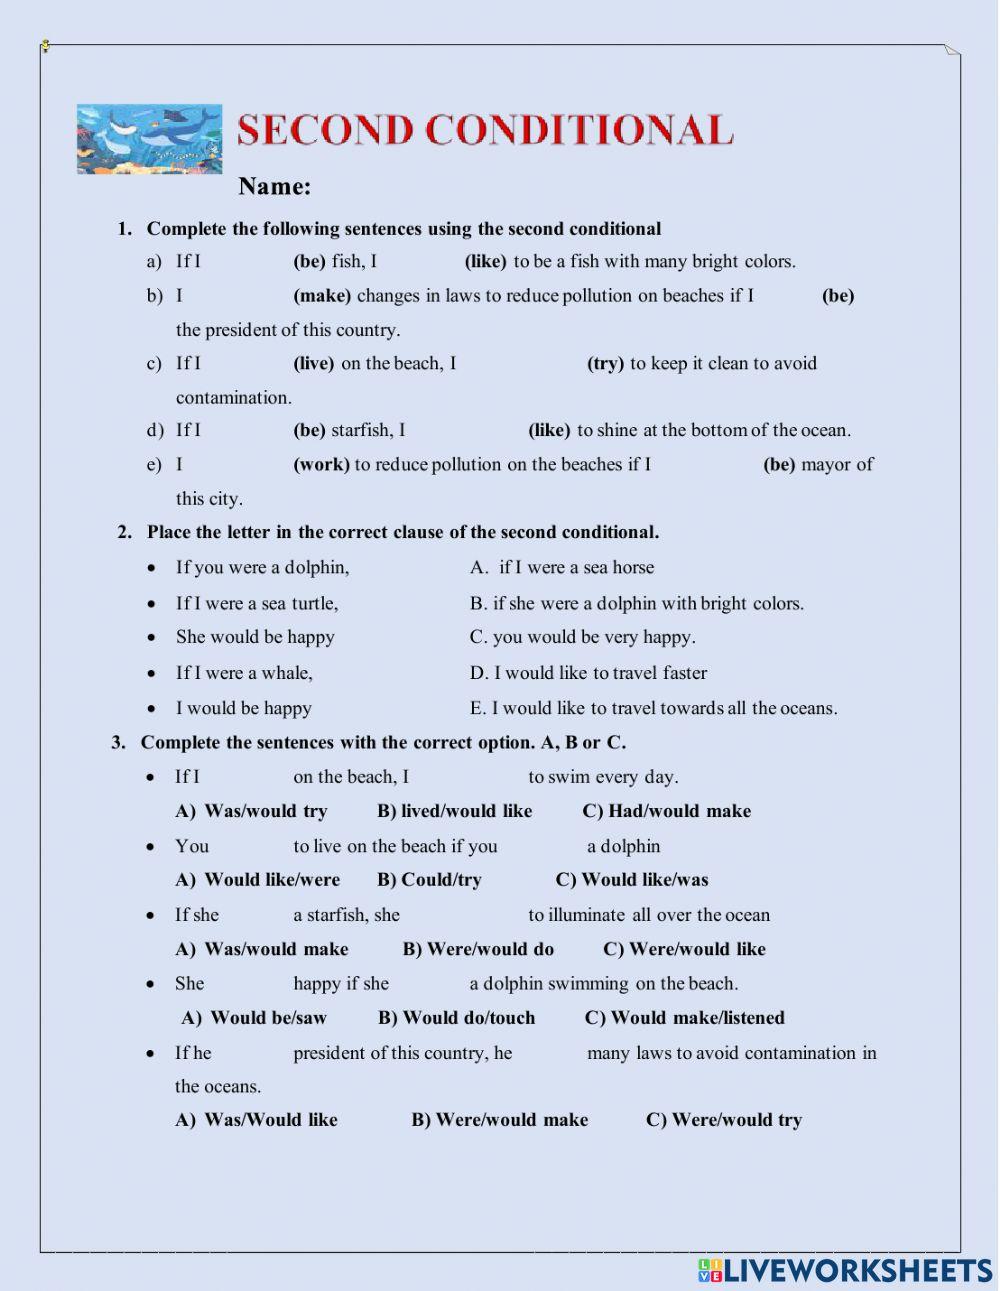 Worksheet Second conditional